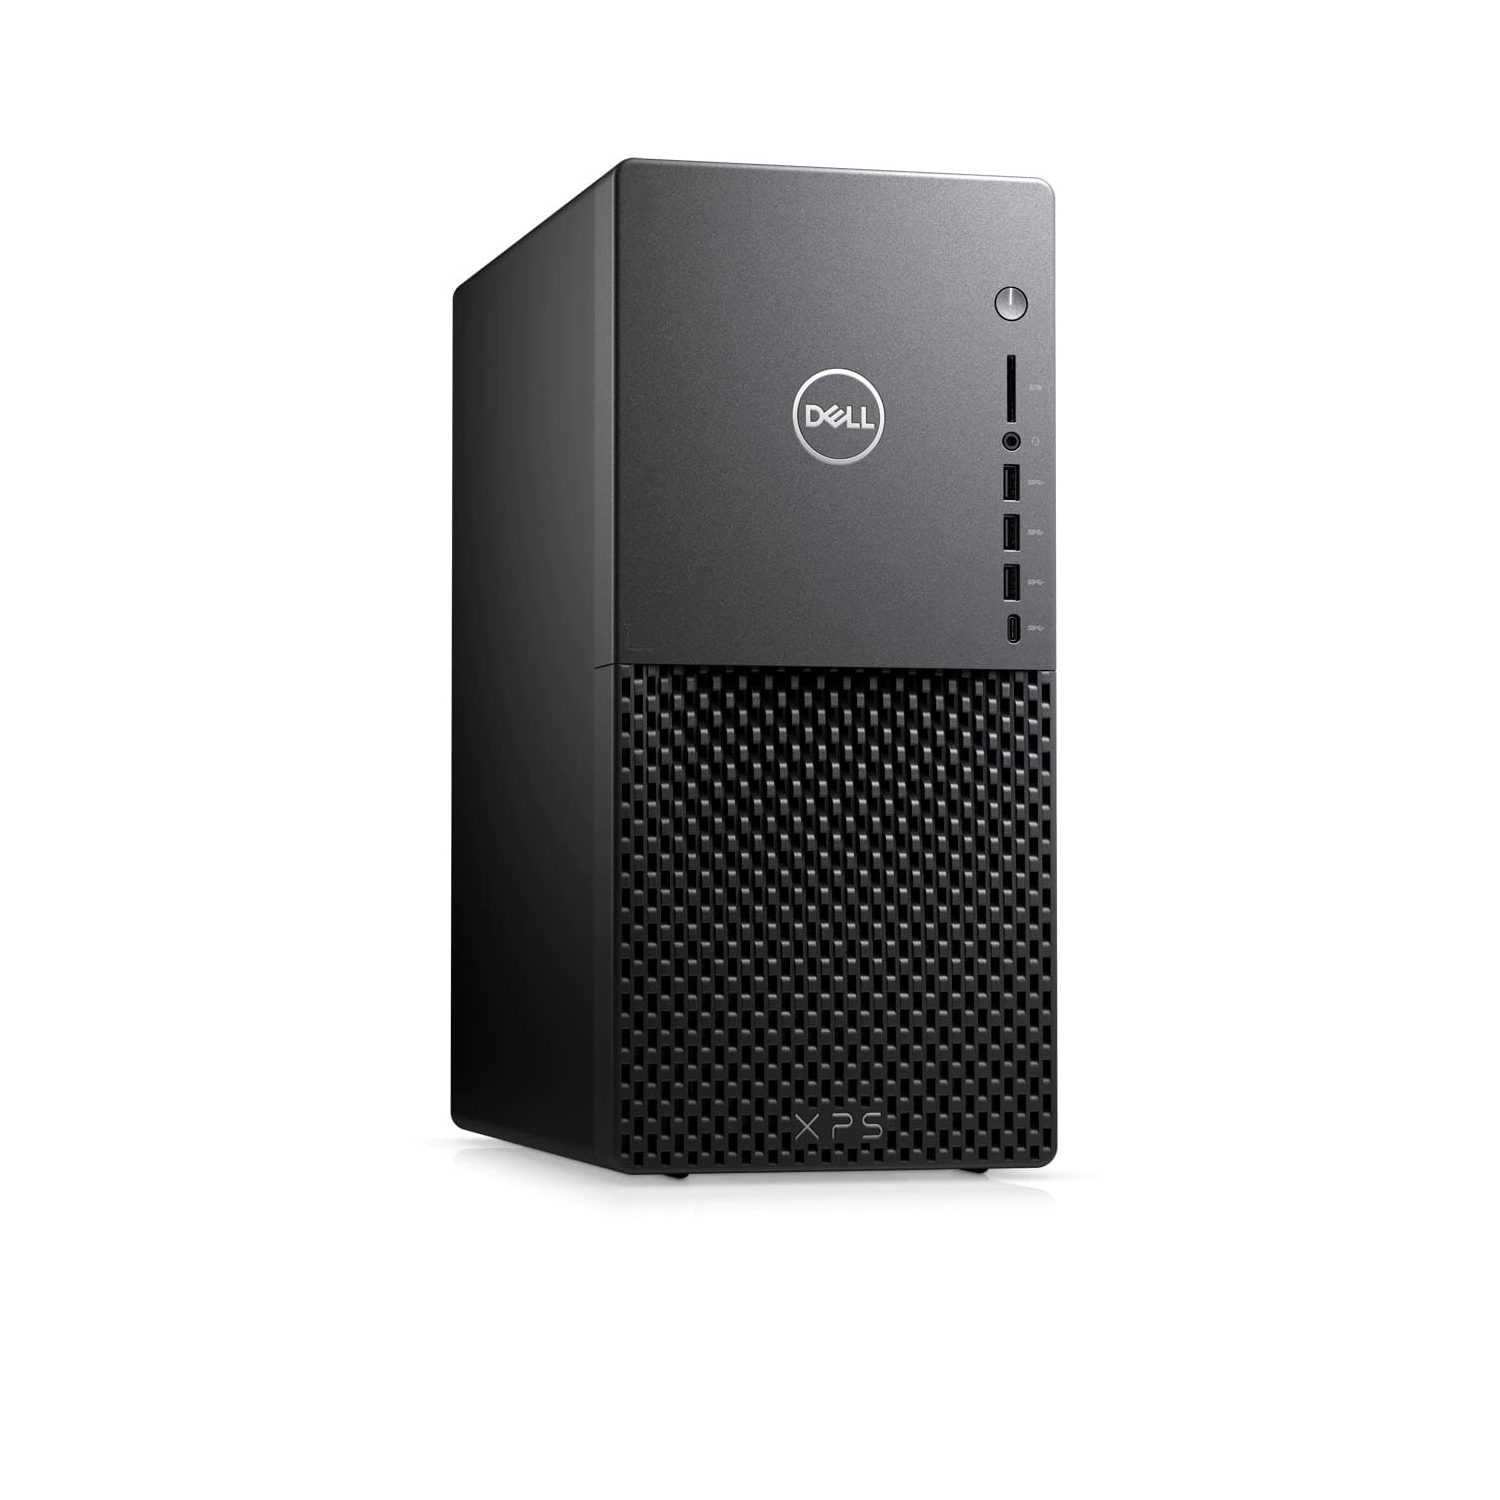 Refurbished (Excellent) - Dell XPS 8940 Desktop (2020) | Core i7 - 1TB SSD - 16GB RAM - RX 5700 | 8 Cores @ 4.8 GHz - 10th Gen CPU Certified Refurbished